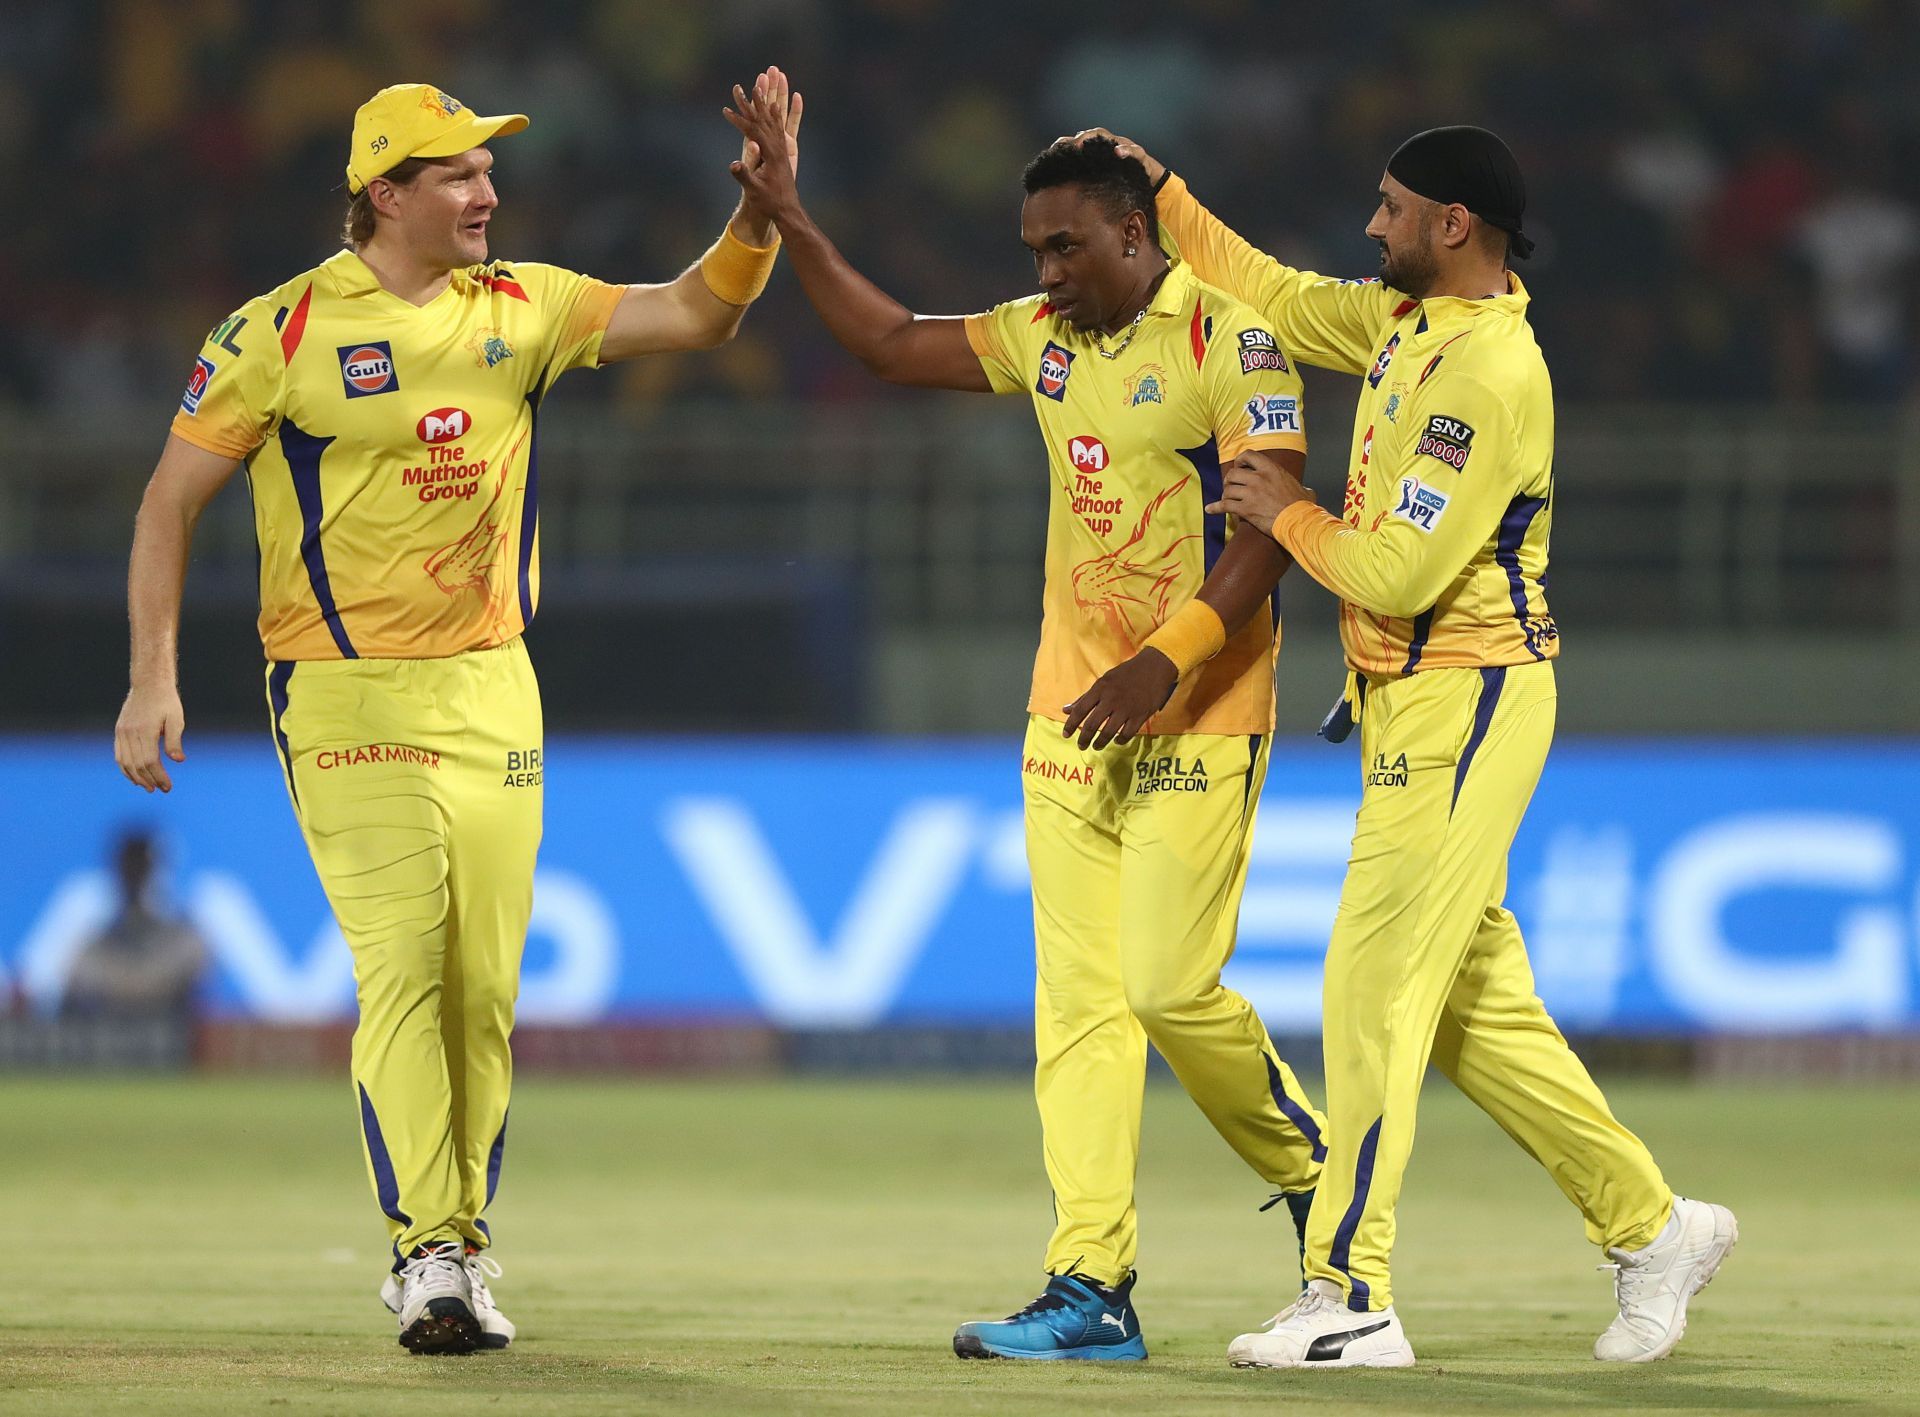 Dwayne Bravo has been the backbone of the CSK franchise for years now (Image courtesy: iplt20.com)